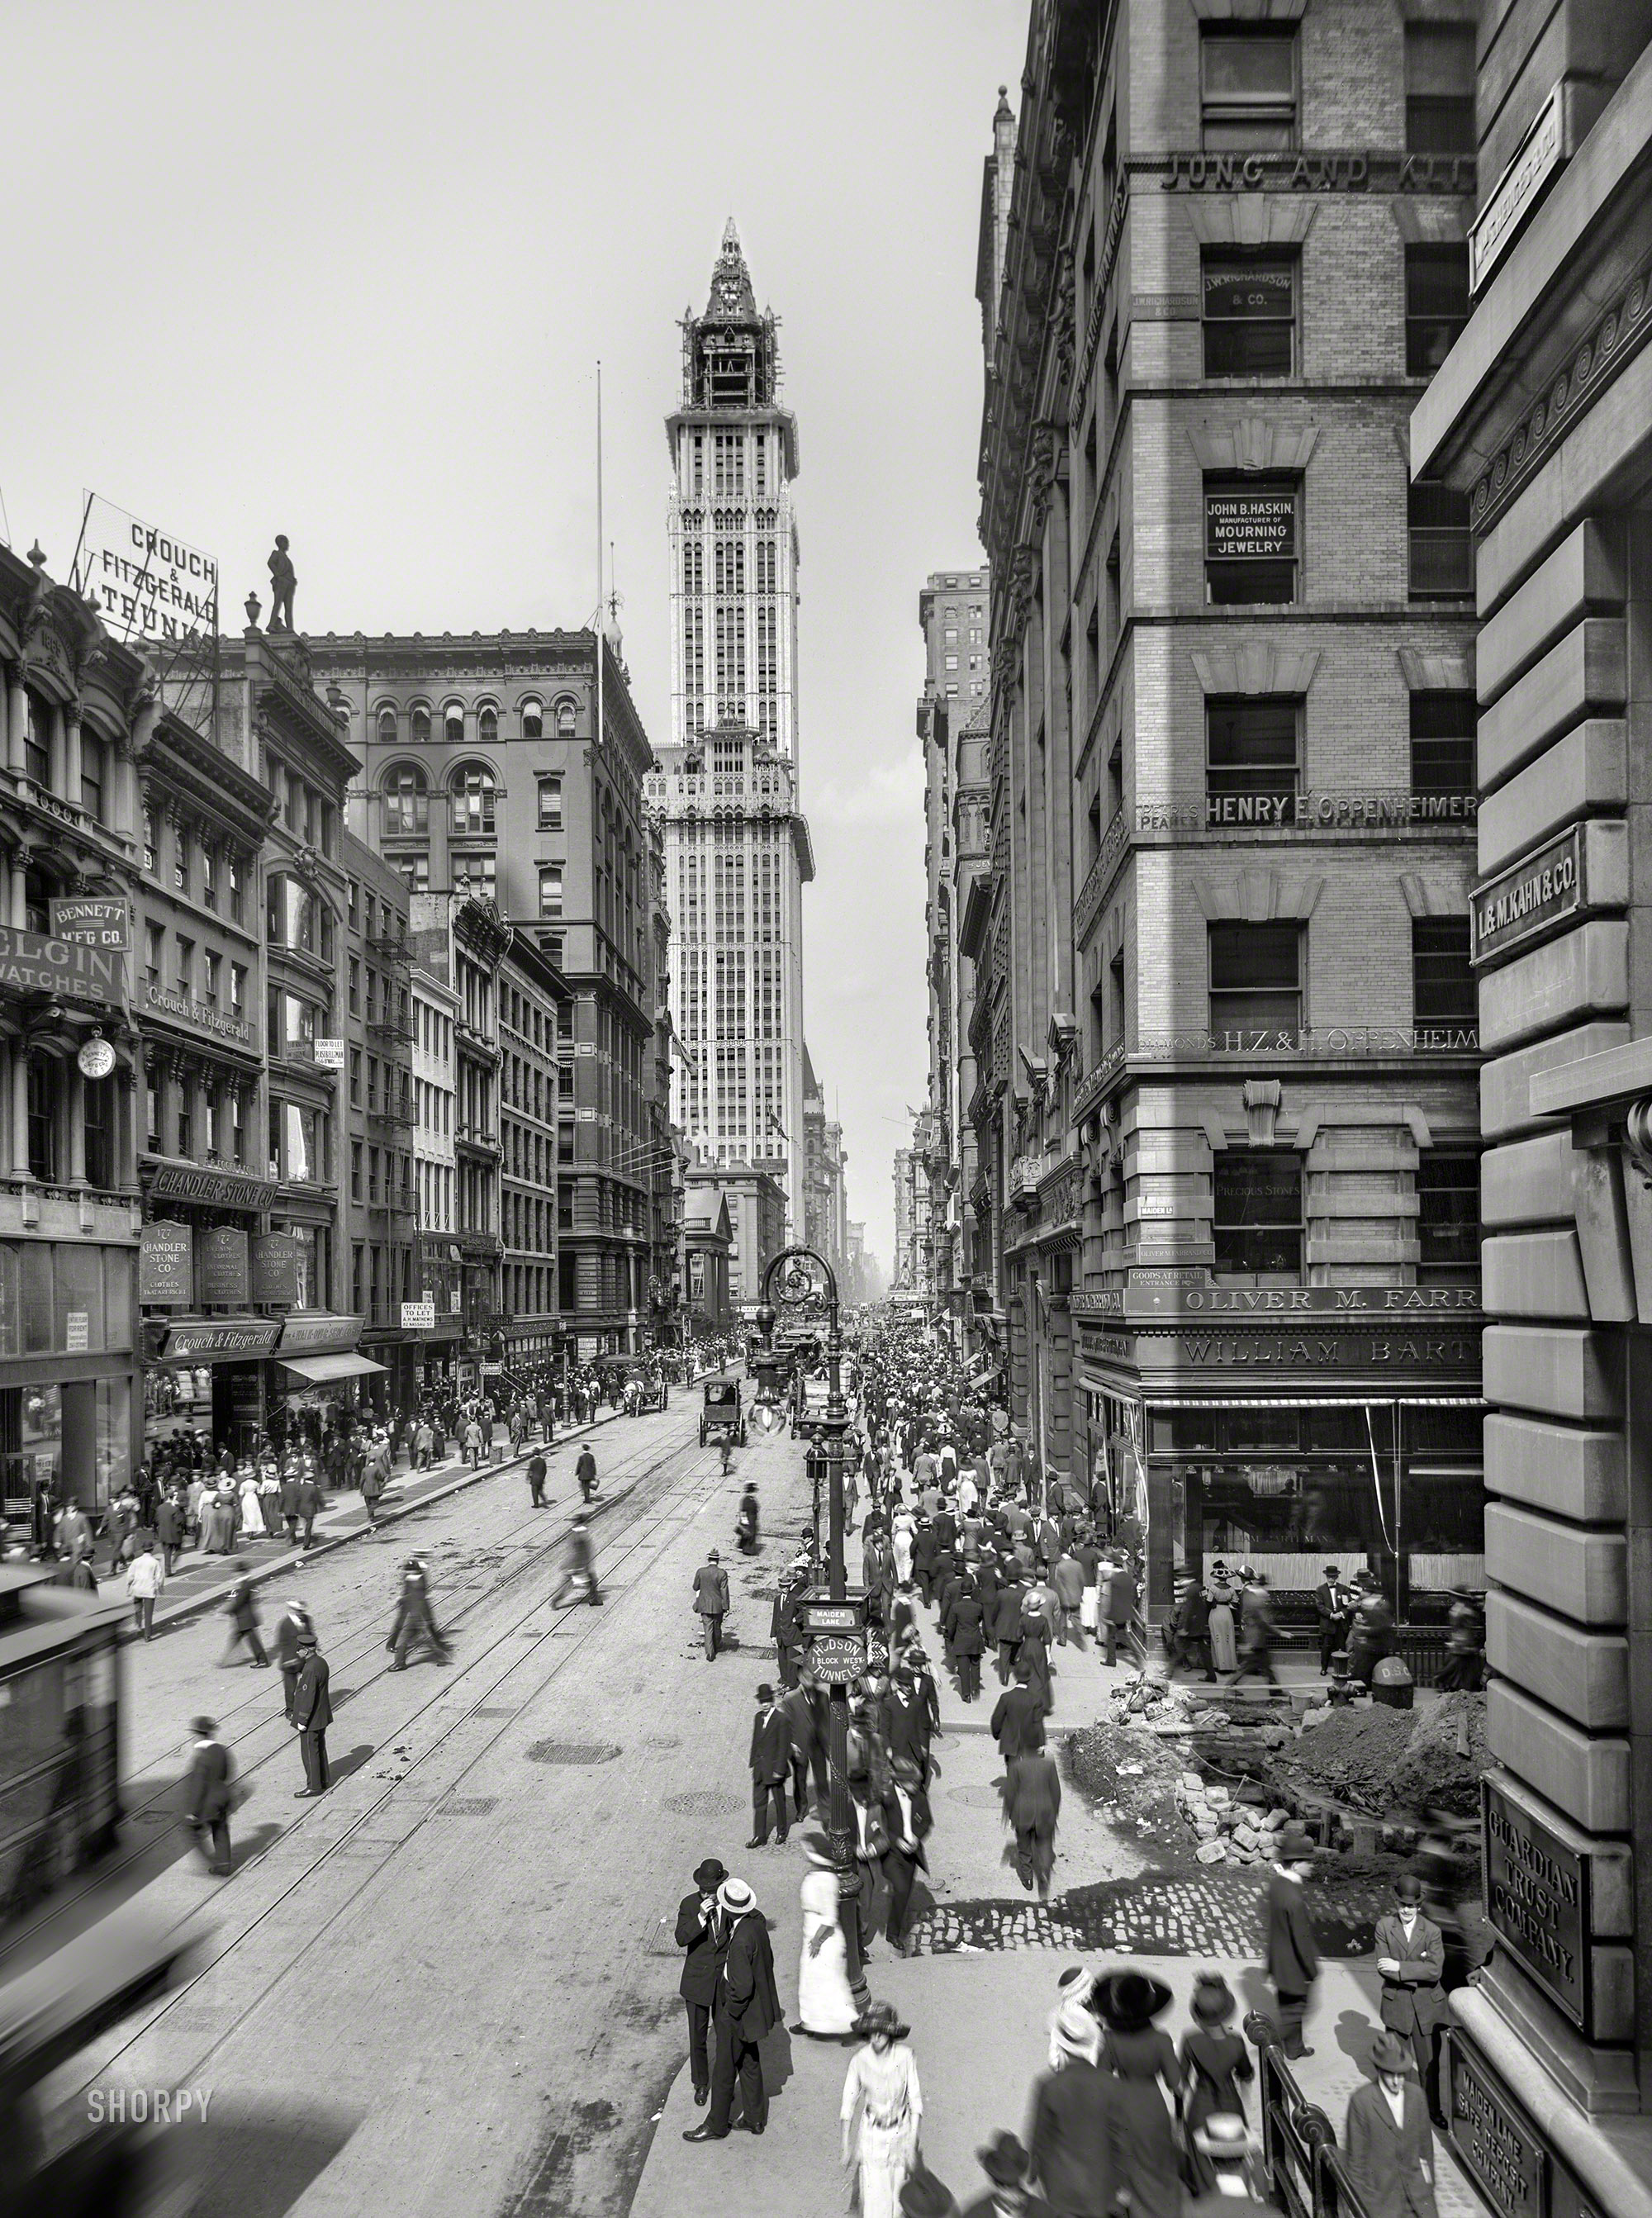 New York circa 1912. "Broadway, looking north from Cortlandt Street and Maiden Lane." Our second look in recent weeks at the Woolworth Building in the final stages of construction. 8x10 inch dry plate glass negative. View full size.